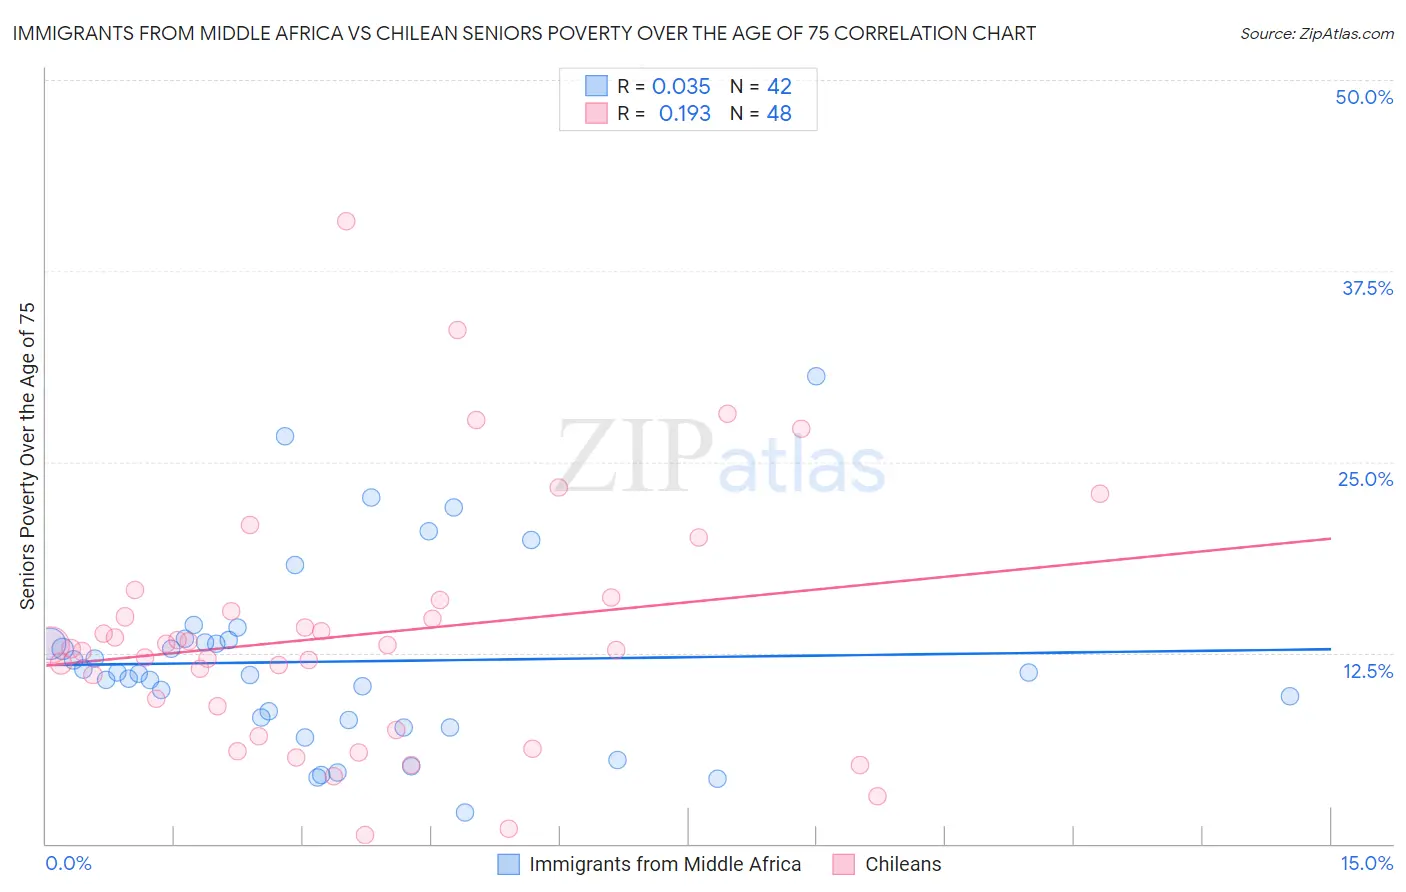 Immigrants from Middle Africa vs Chilean Seniors Poverty Over the Age of 75